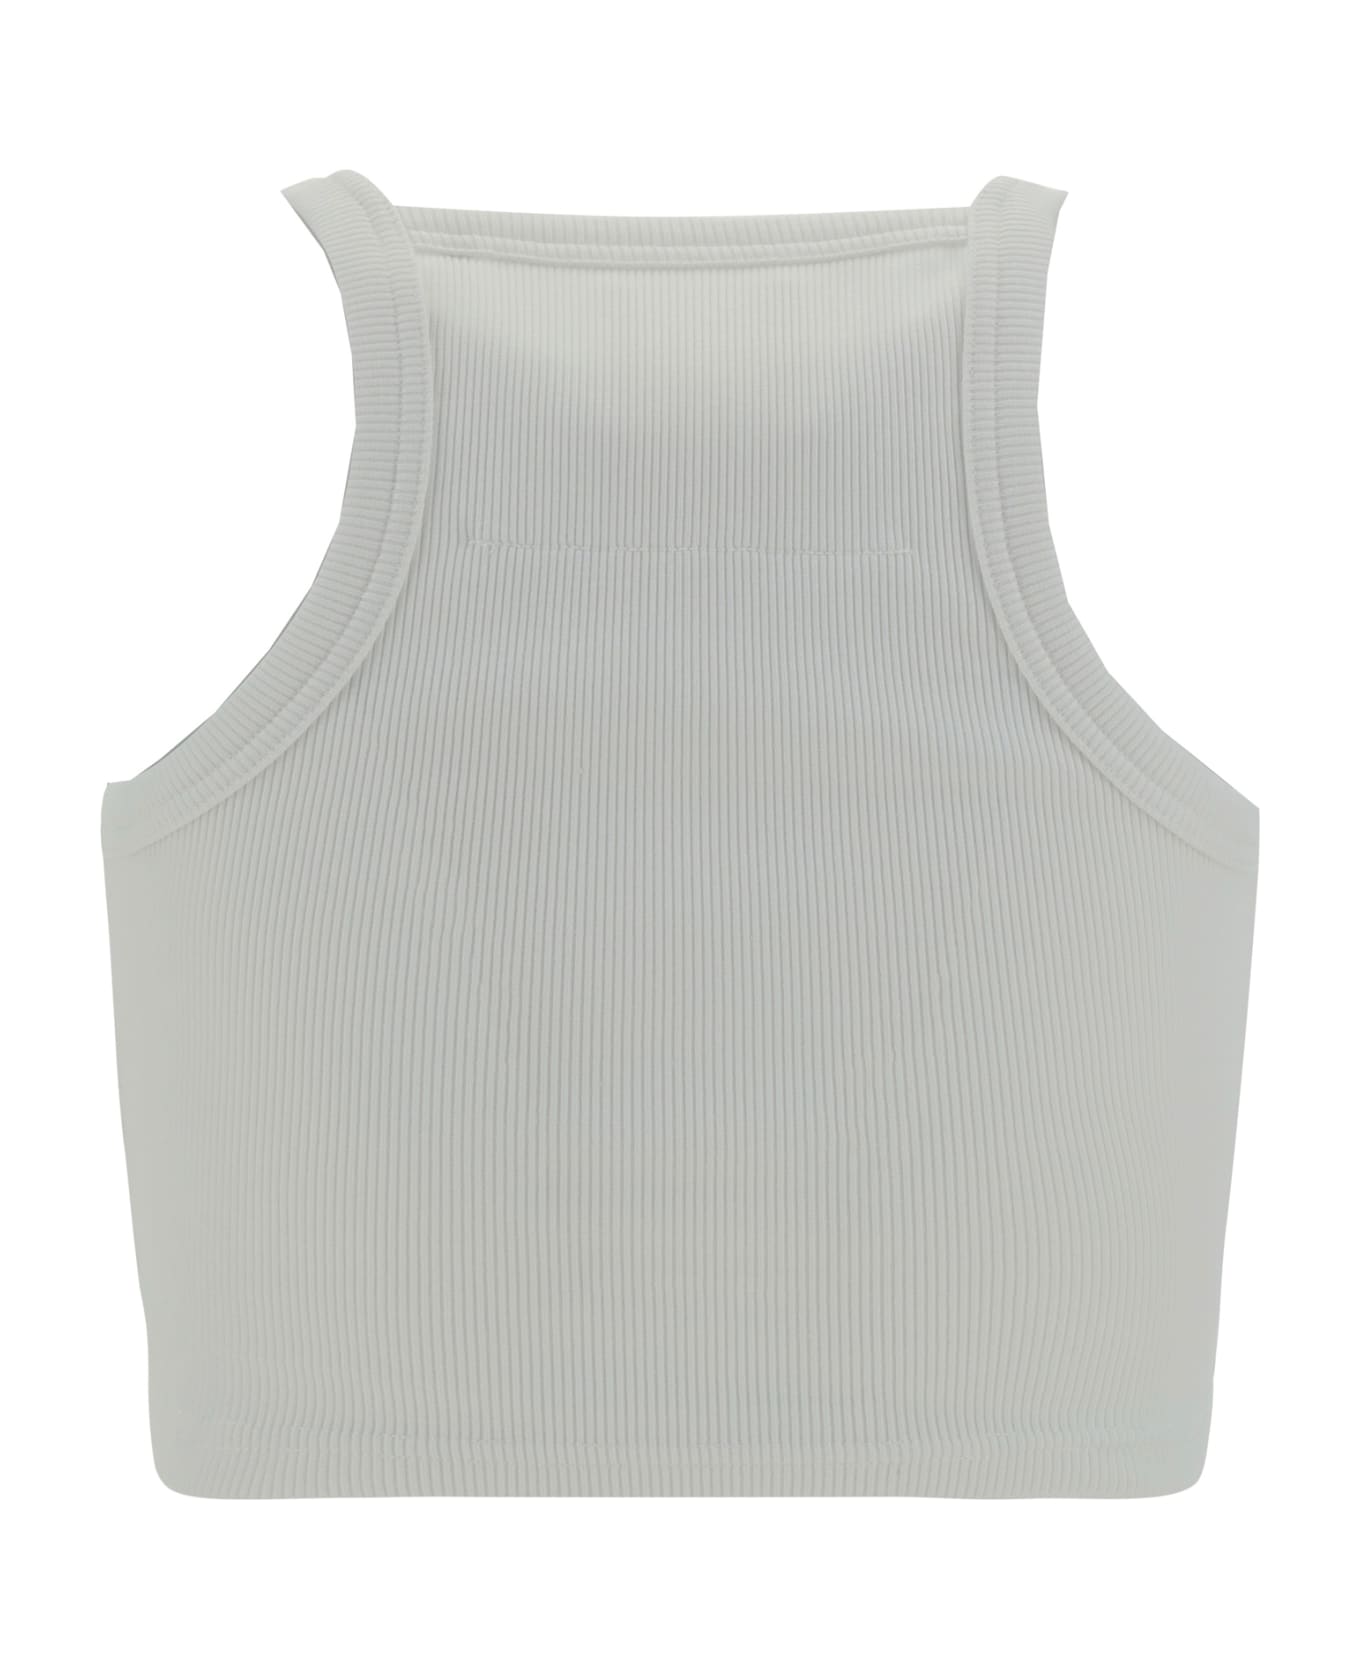 Givenchy 4g Plaque Cropped Tank Top - White